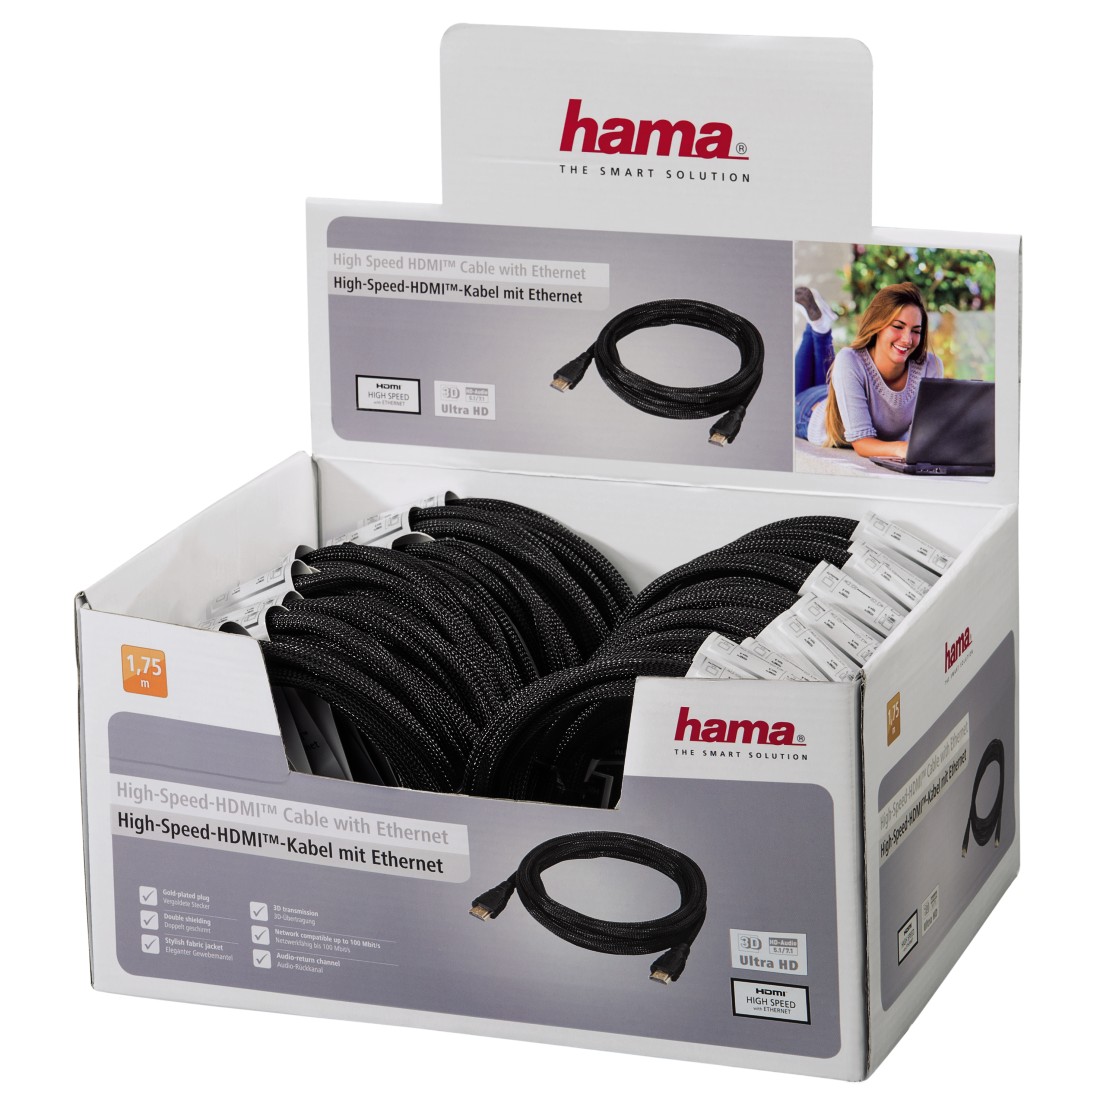 Hama High Speed HDMI™ Cable, Ethernet, nylon, 1.75 m, 20 pieces/display